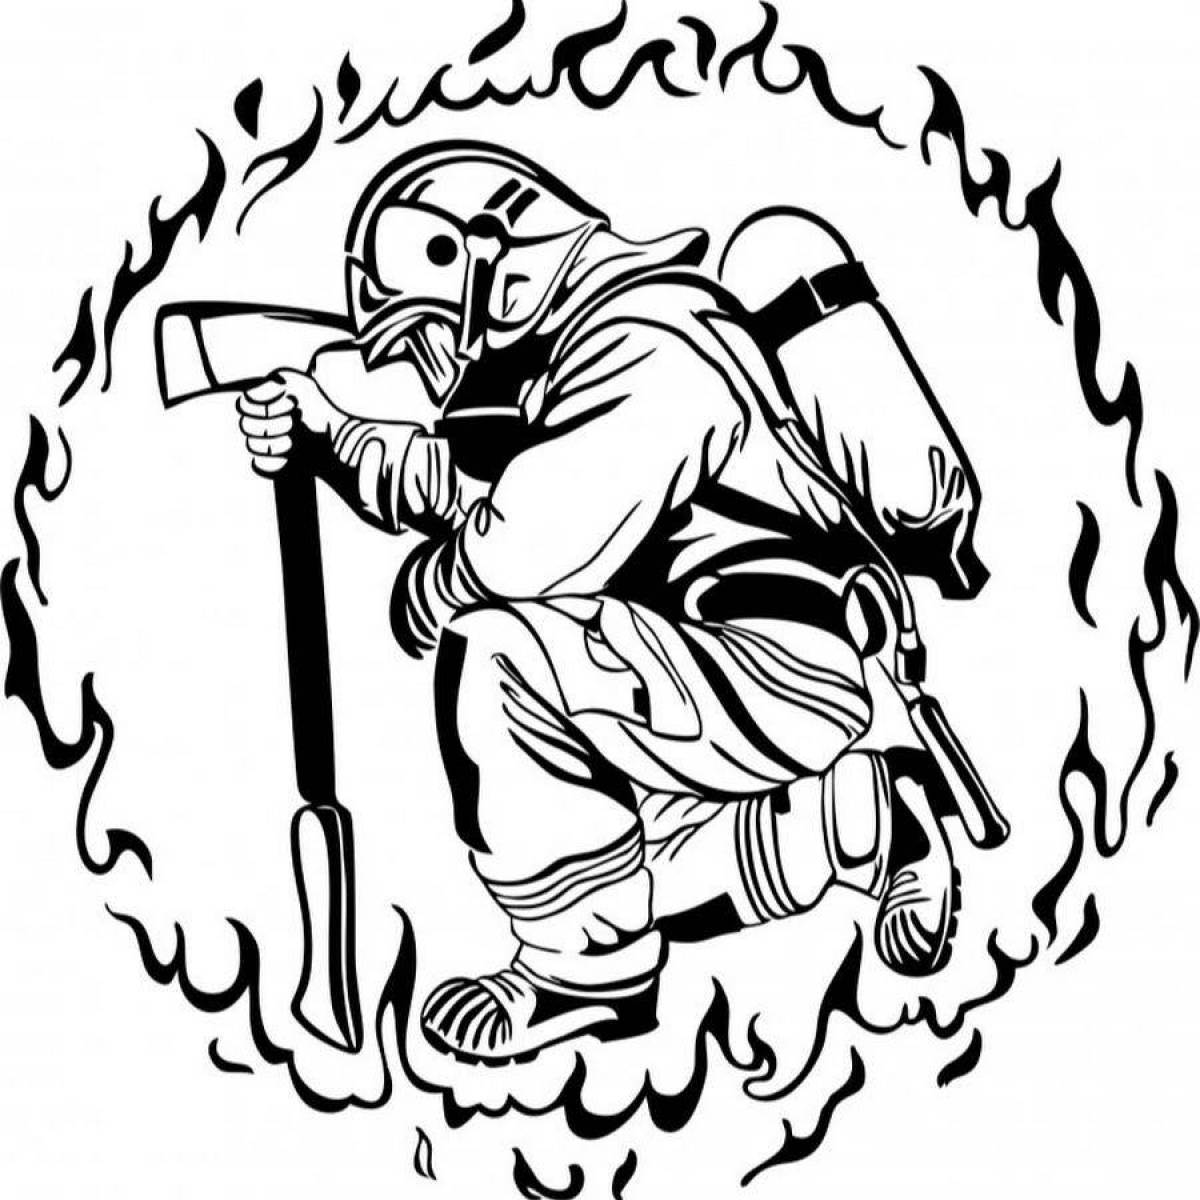 Coloring page mystical emblem of the Ministry of Emergency Situations